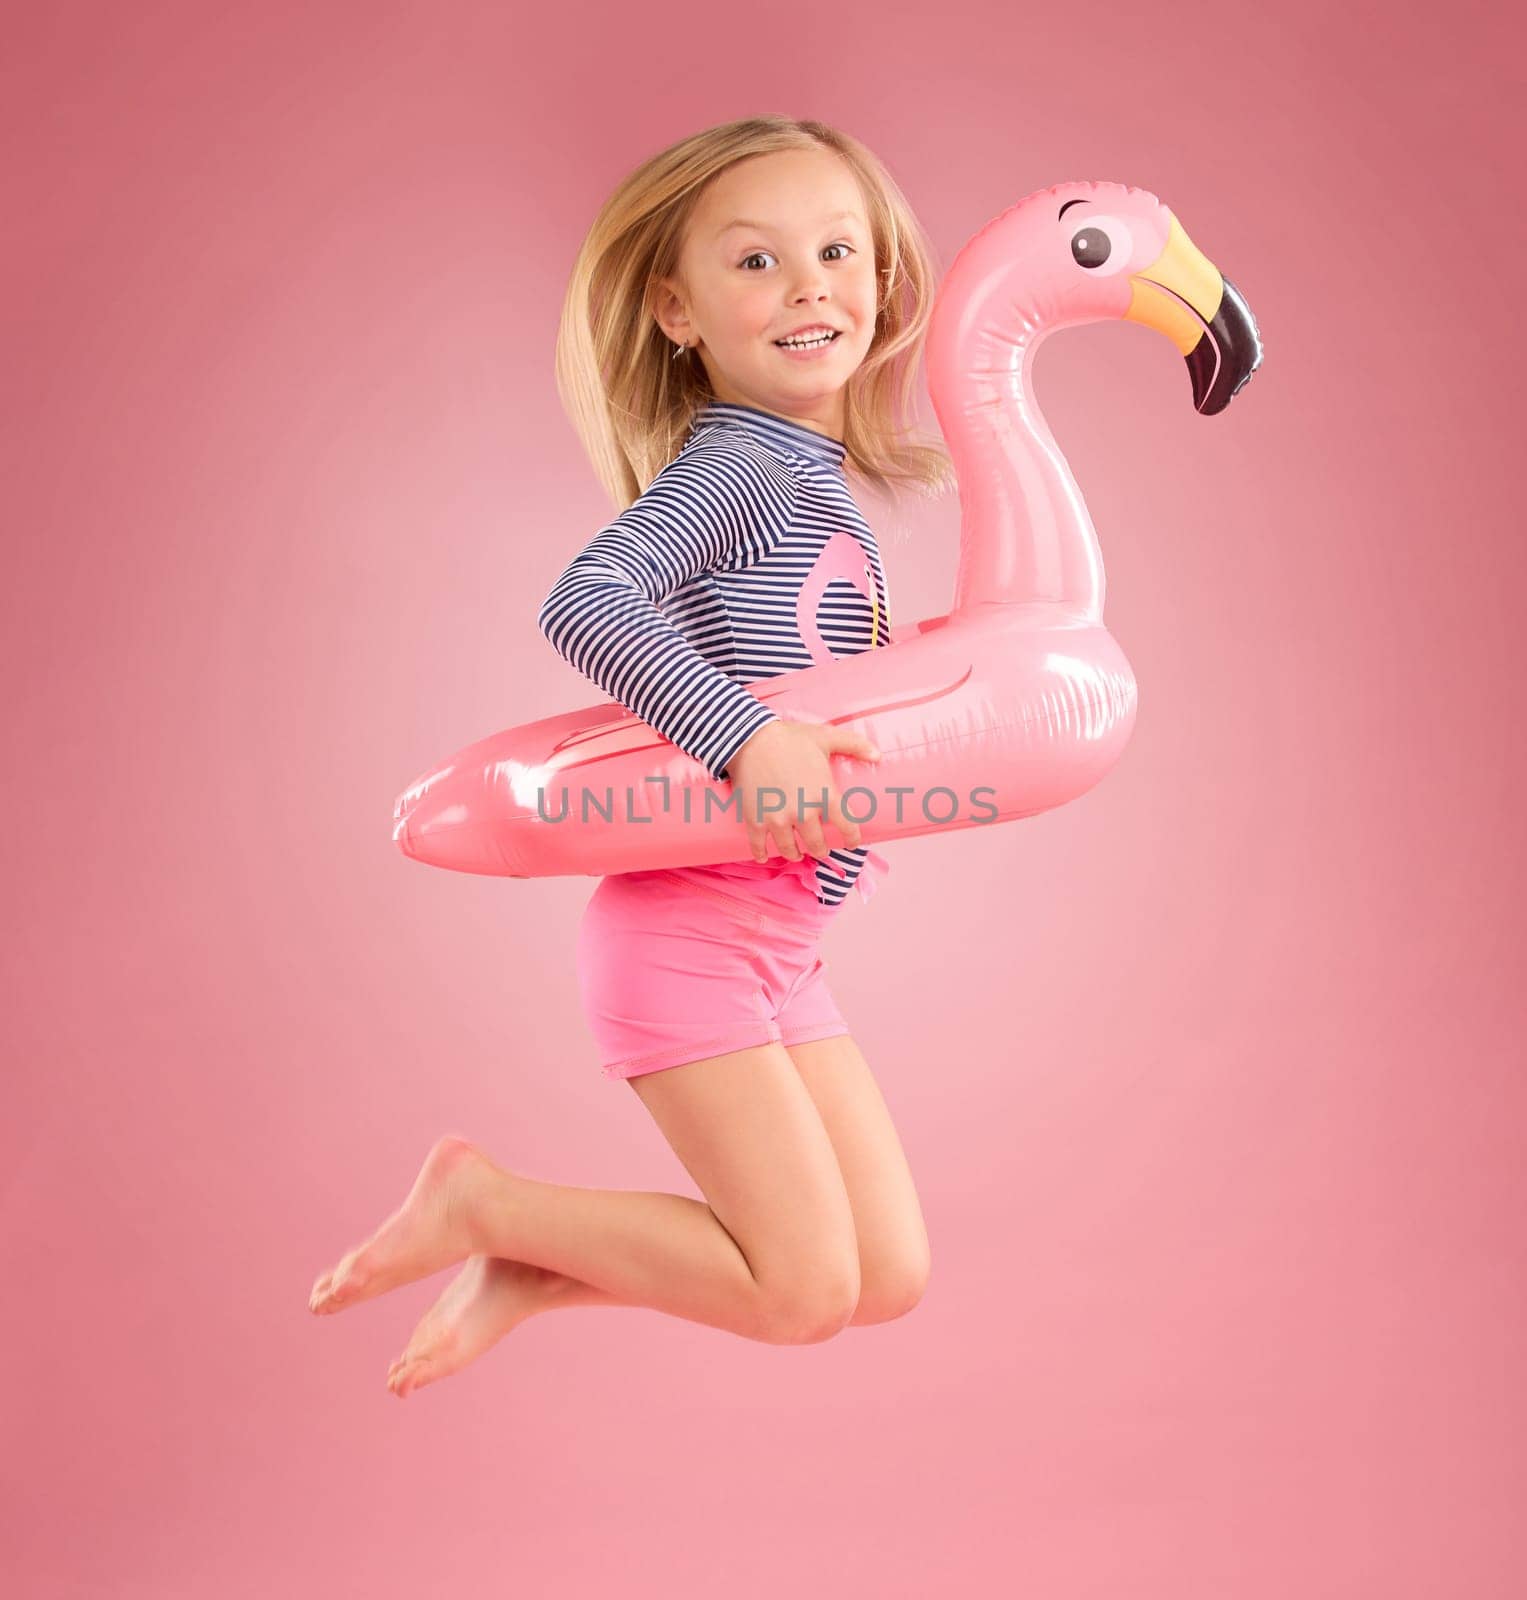 Jump, smile and portrait of girl and pool float for swimming, summer break or happiness. Youth, funny and inflatable with child and flamingo ring for cute, happy or beach holiday on pink background.